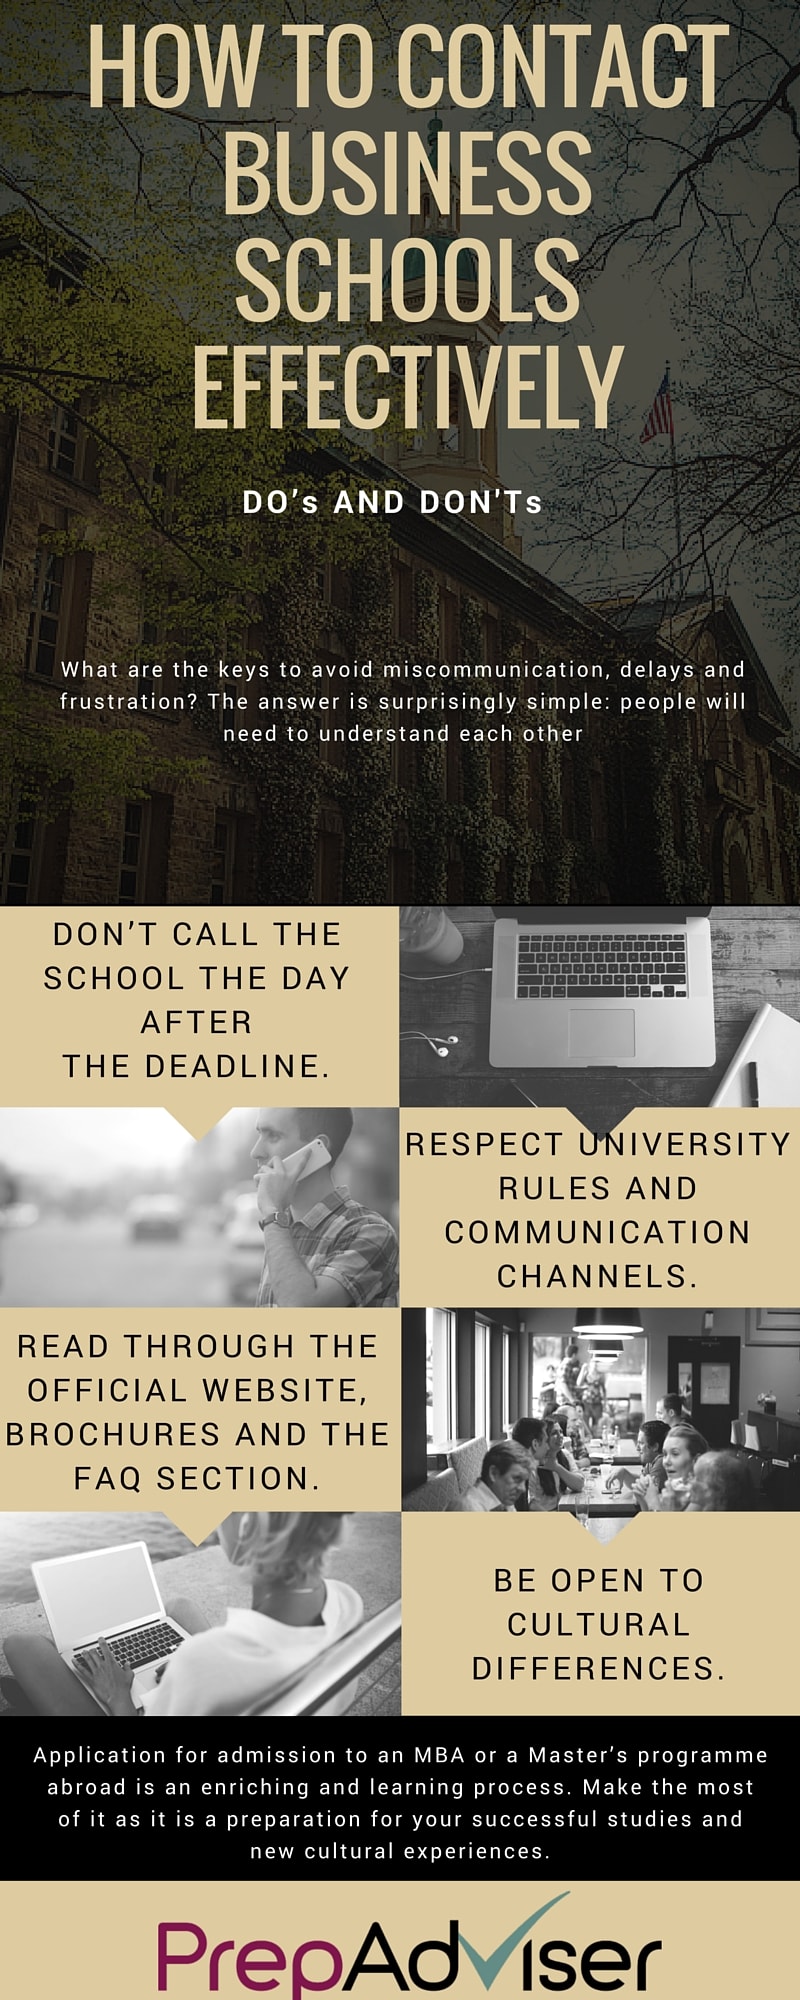 How to Contact Business Schools Effectively PrepAdviser Infographic